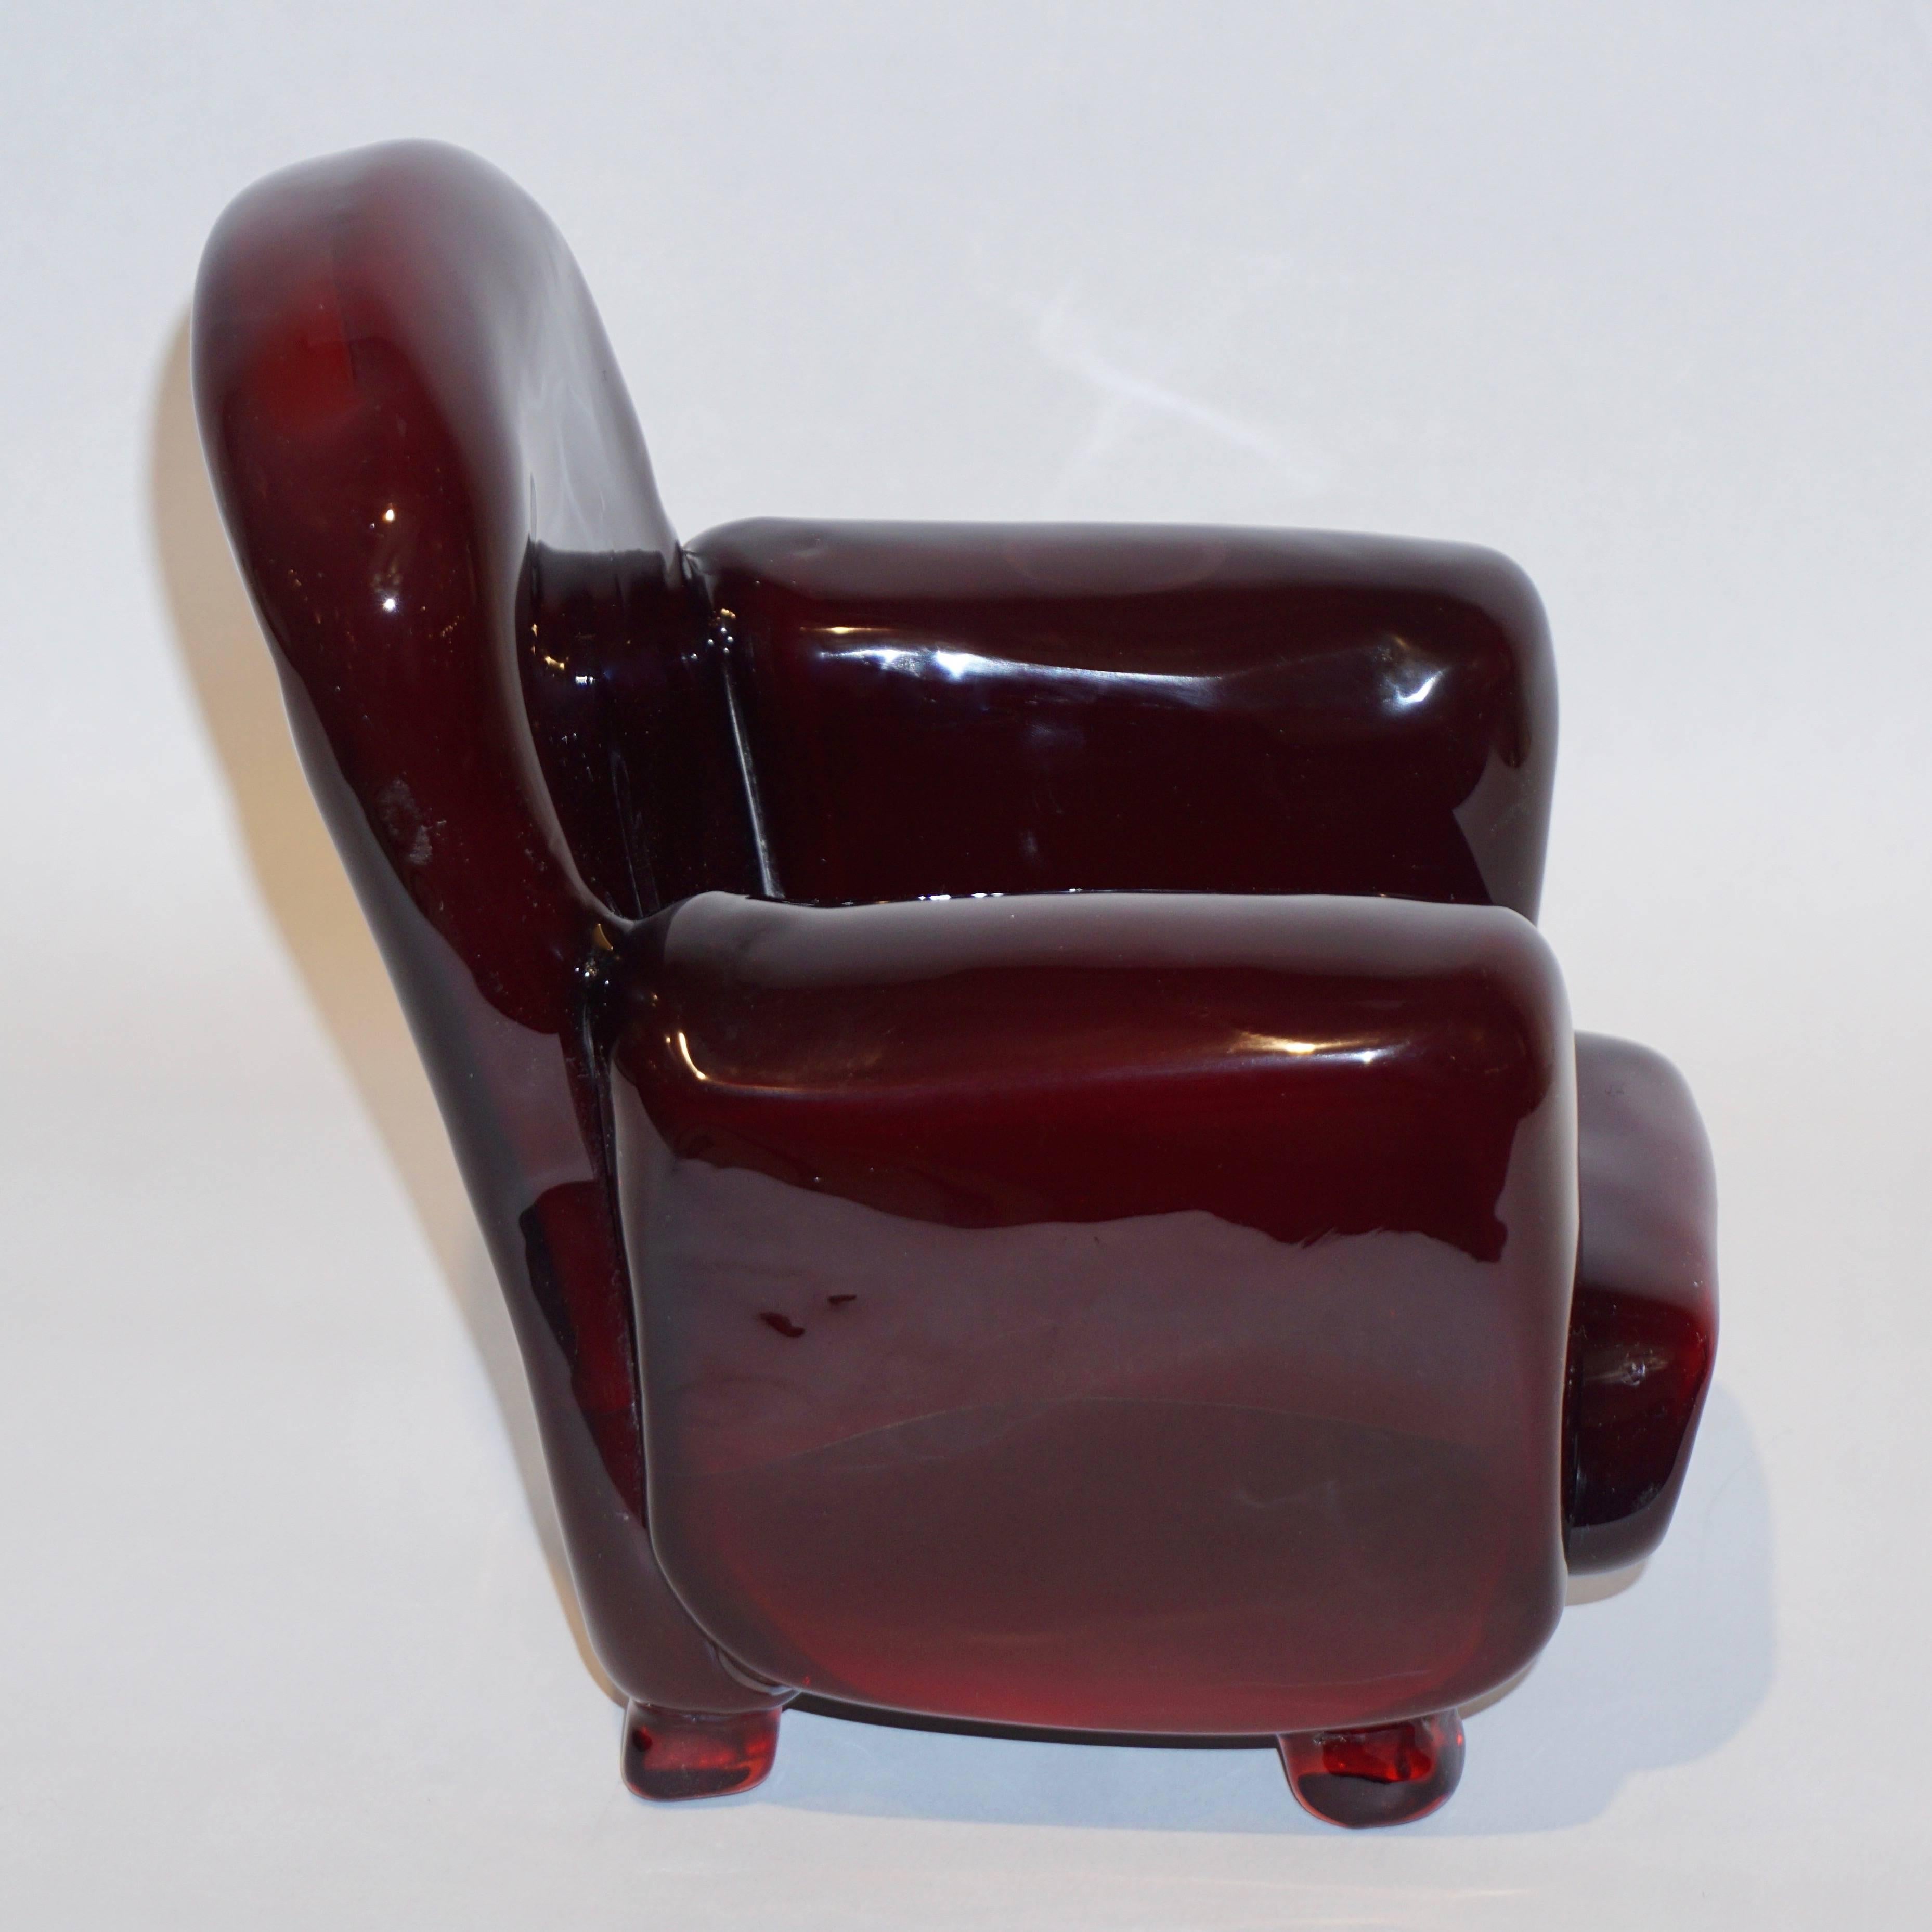 This delightful armchair in miniature size is a vintage organic Work of Art, sculpture in blown Murano art glass, signed by Pino Signoretto, in an attractive wine red color. A charming object, nicely detailed. One arm presents a circle visible in